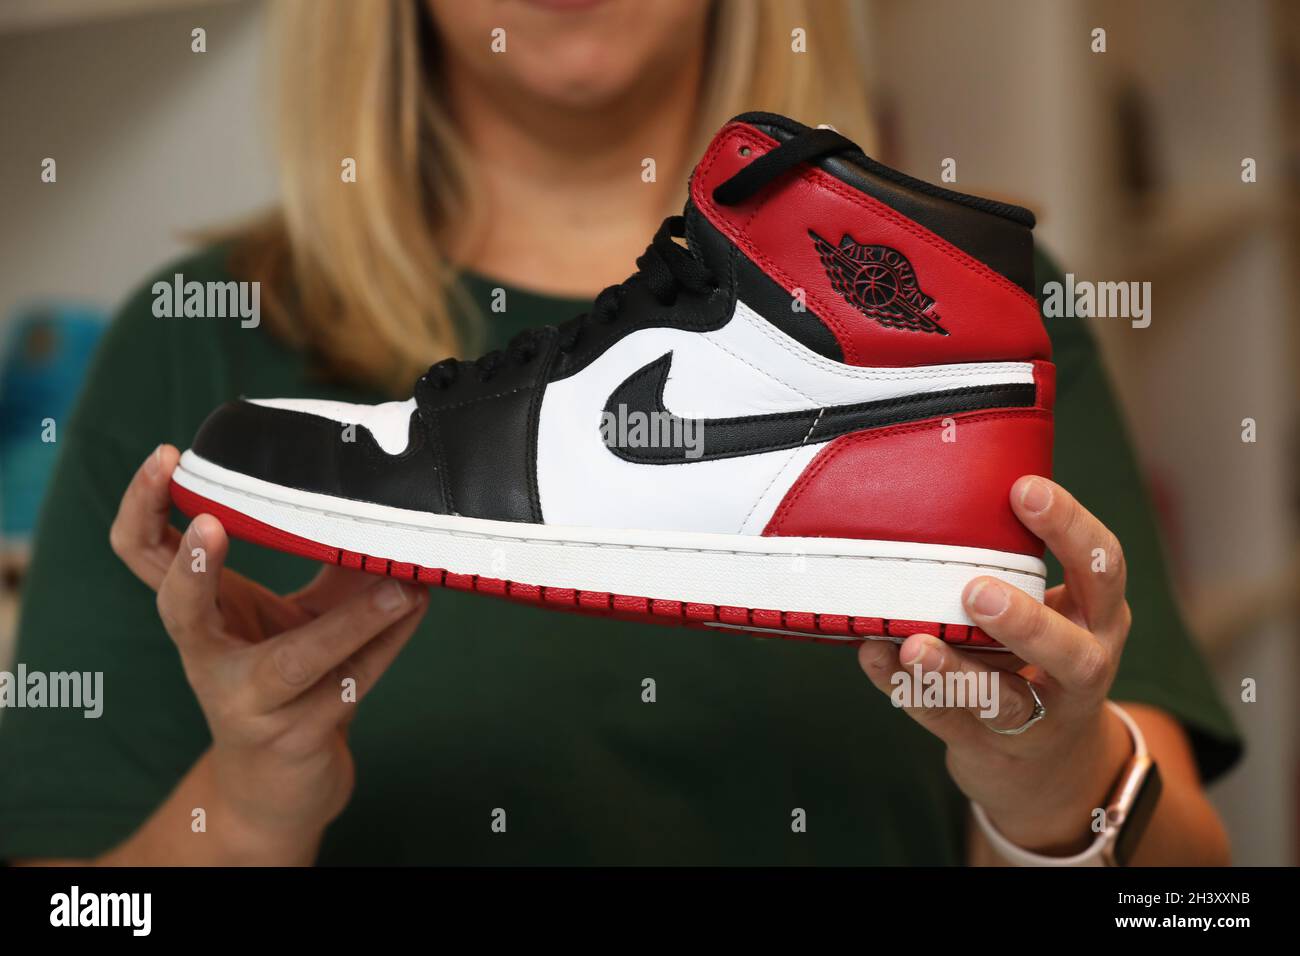 at lege Goneryl Rang Original, rare Nike Air Jordan Trainers from the 1980's pictured in a  trainer shop in Portsmouth, Hampshire, UK Stock Photo - Alamy